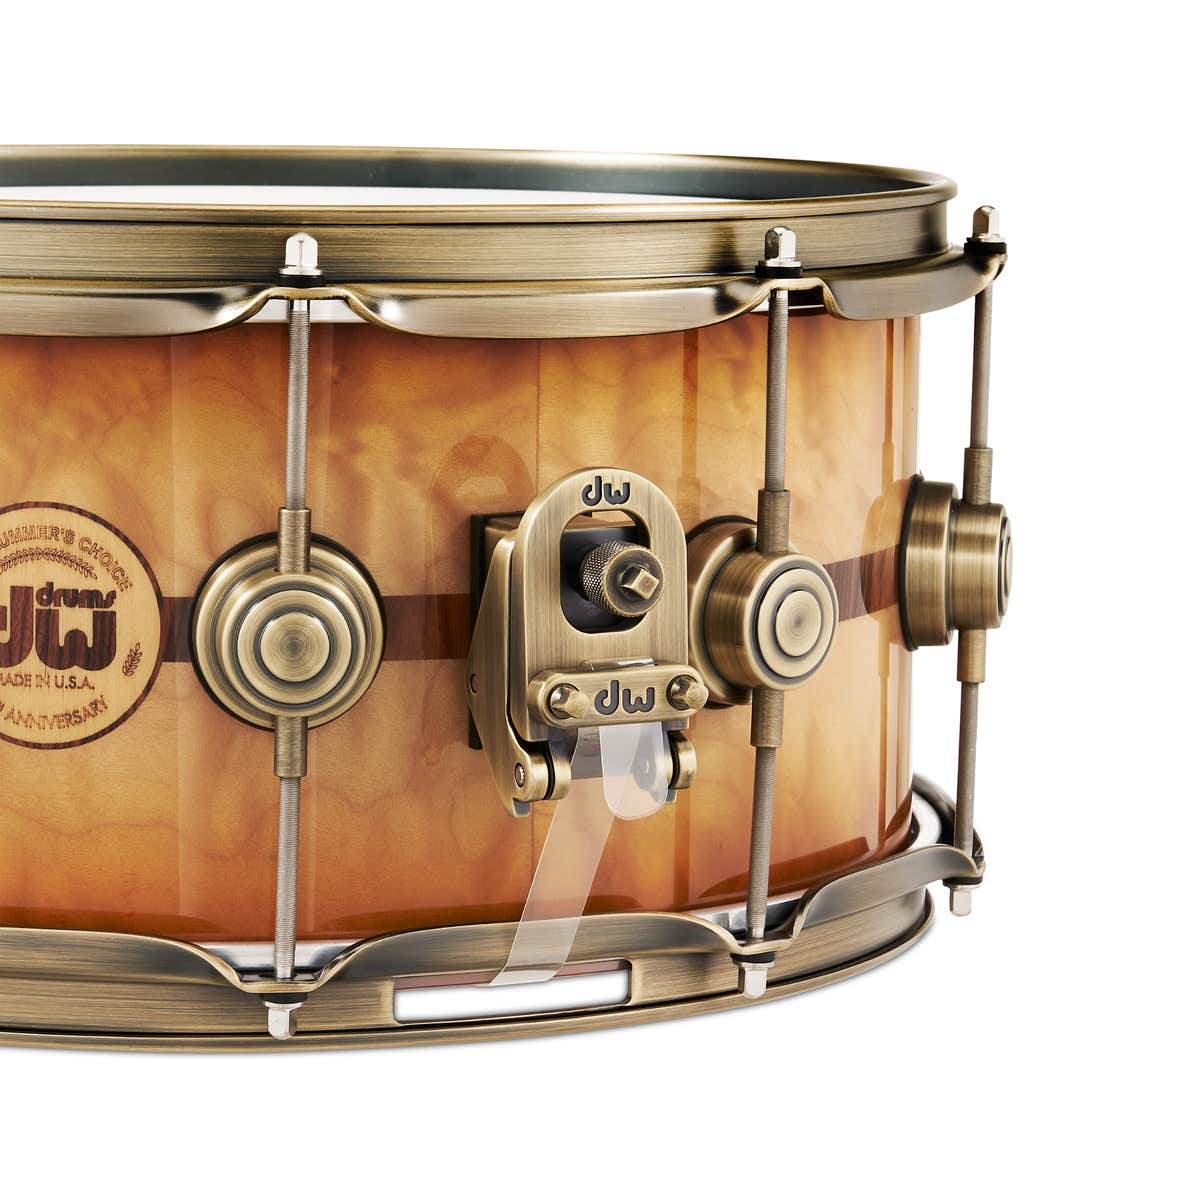 DW 50th Ann. Limited Edition 6.5x14 Snare Drum - Burnt Toast Burst (Lacquer)